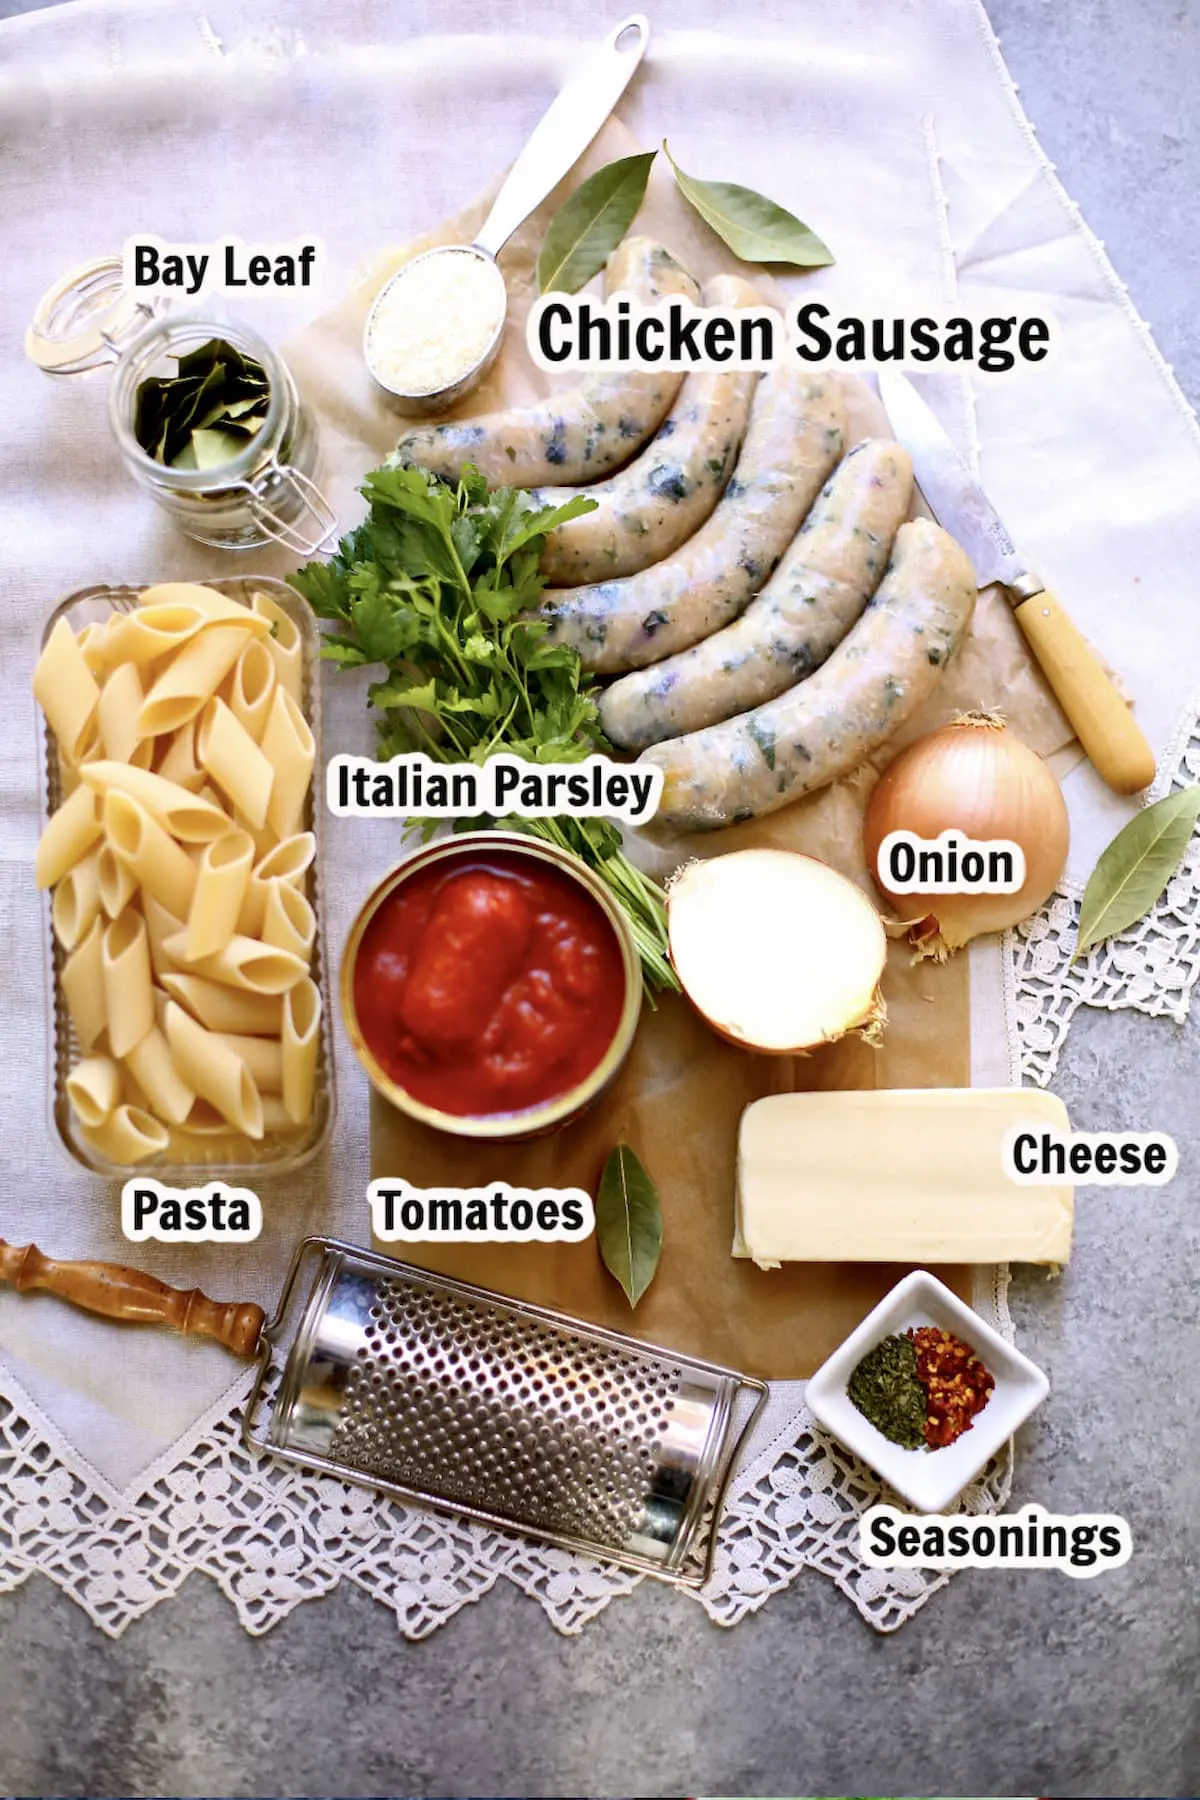 a table of ingredients for baked pasta with sausage, with text overlay saying what eash ingredient is. cheese, tomatos, sausage, pasta, seasonings.